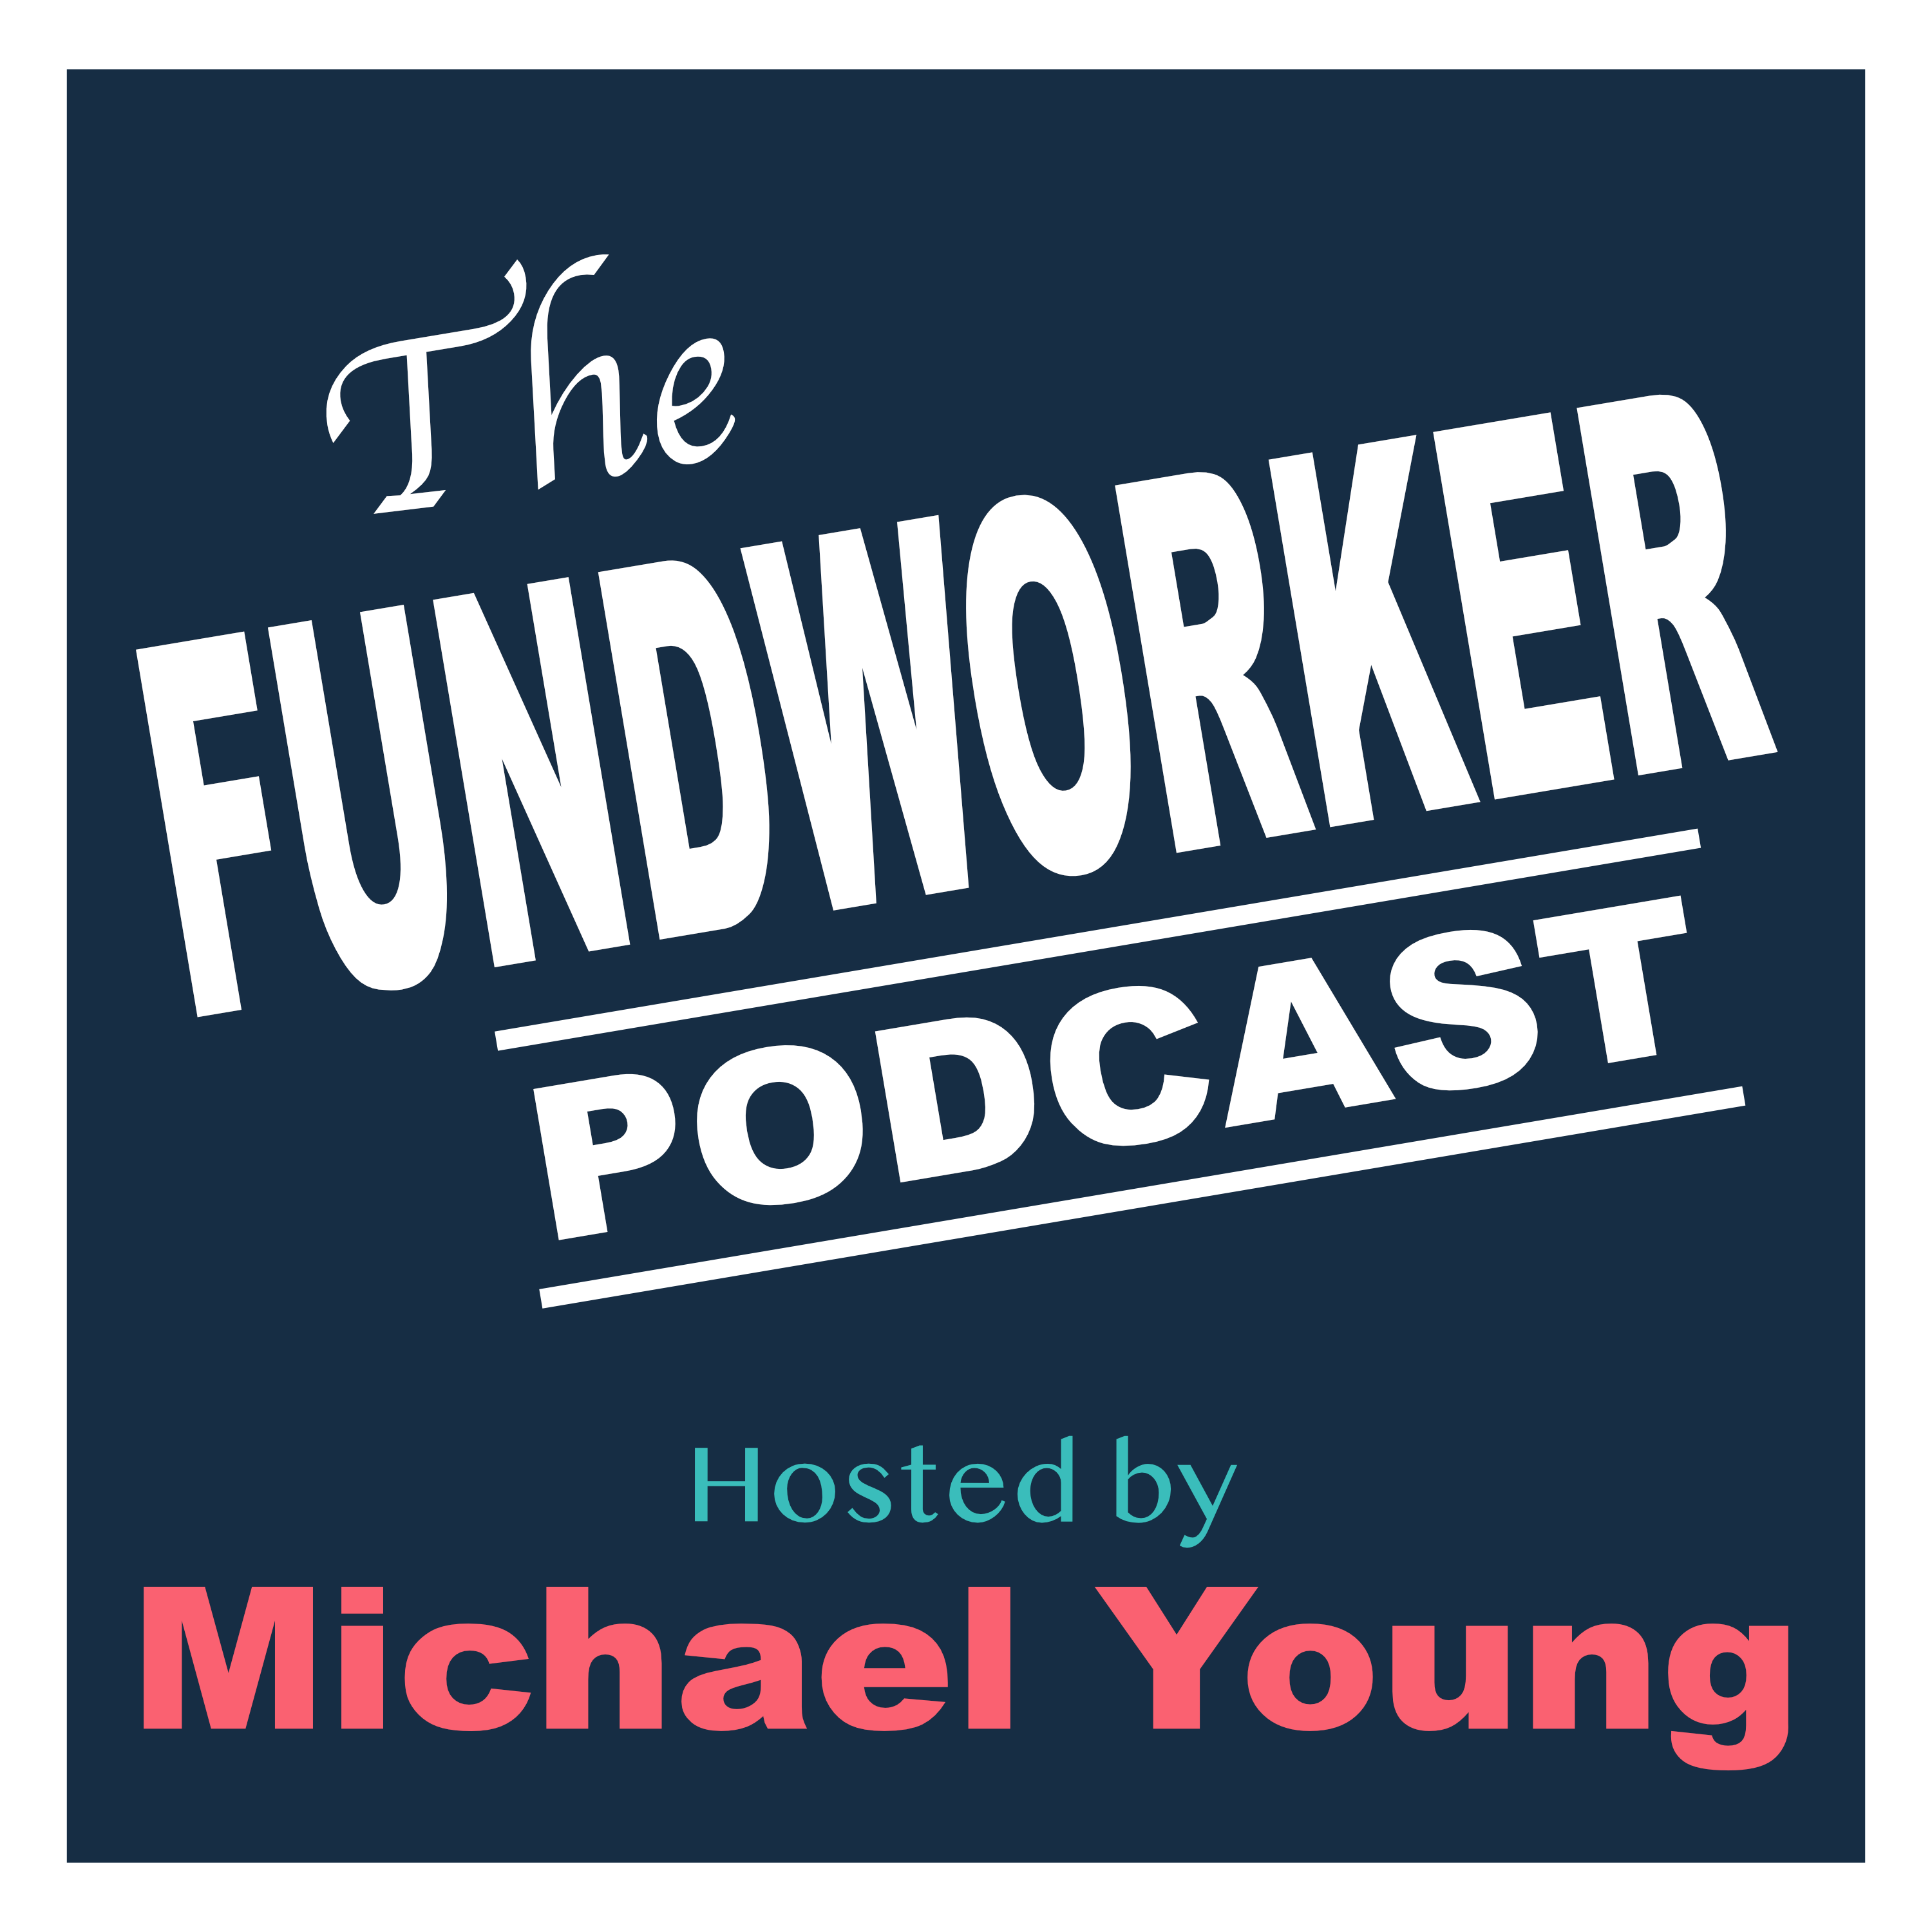 Why and What is Fundworker